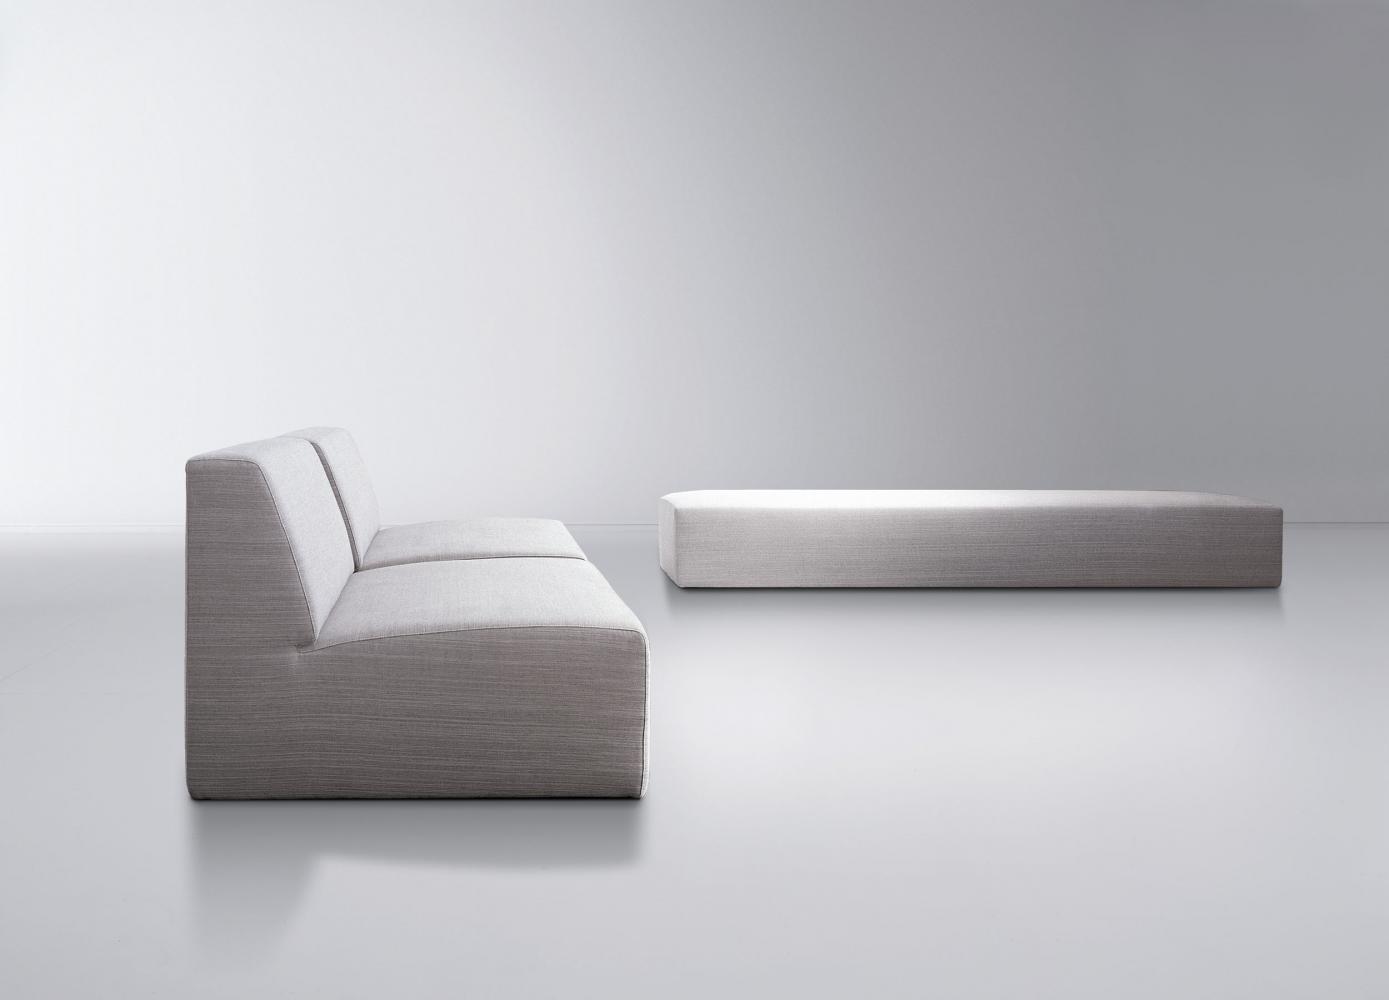 Largo is a modern sofa with minimal design available in leather, fabric or velvet